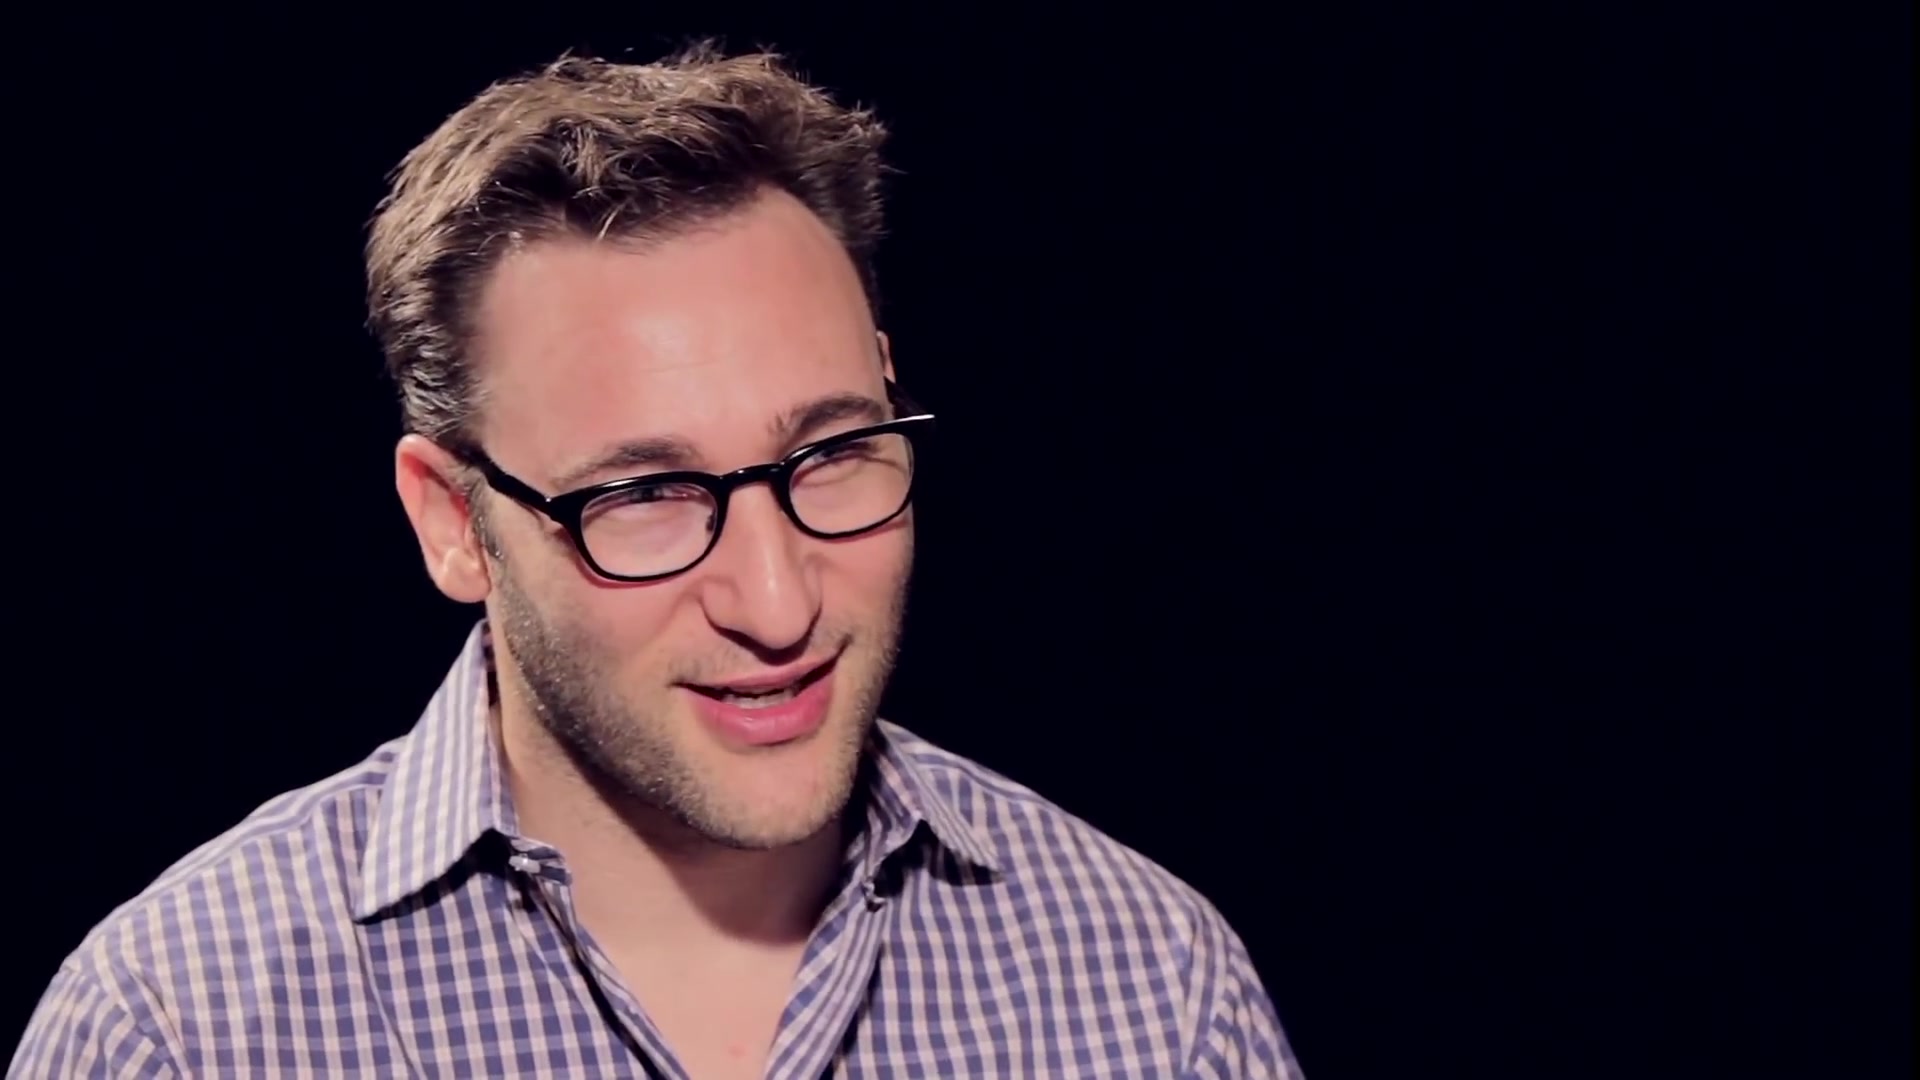 Simon Sinek - How to Fight Loneliness When Working Alone